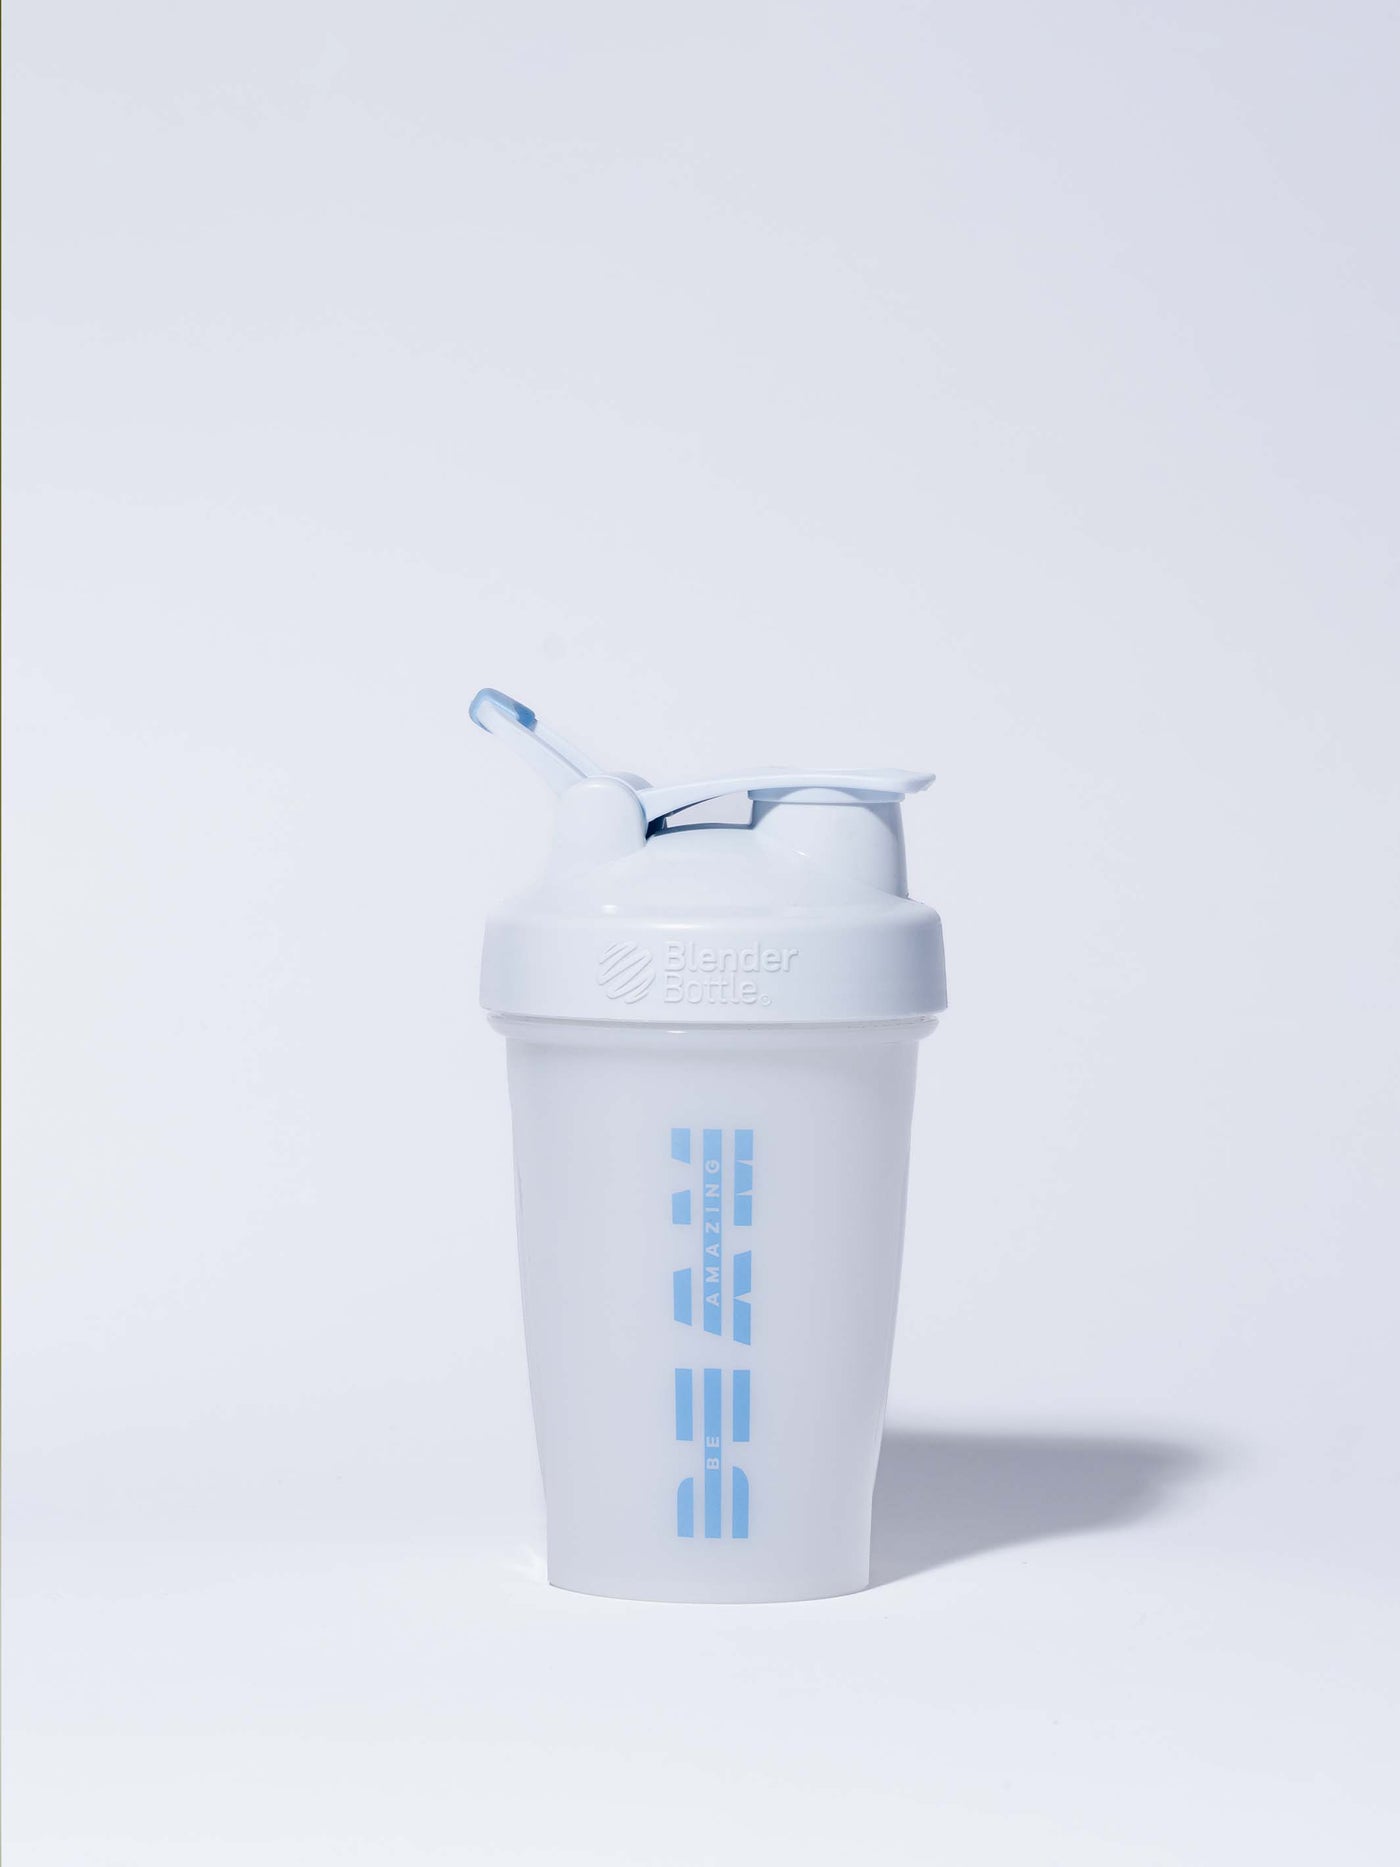 beam be amazing white frost shaker# 20 oz / White Frost